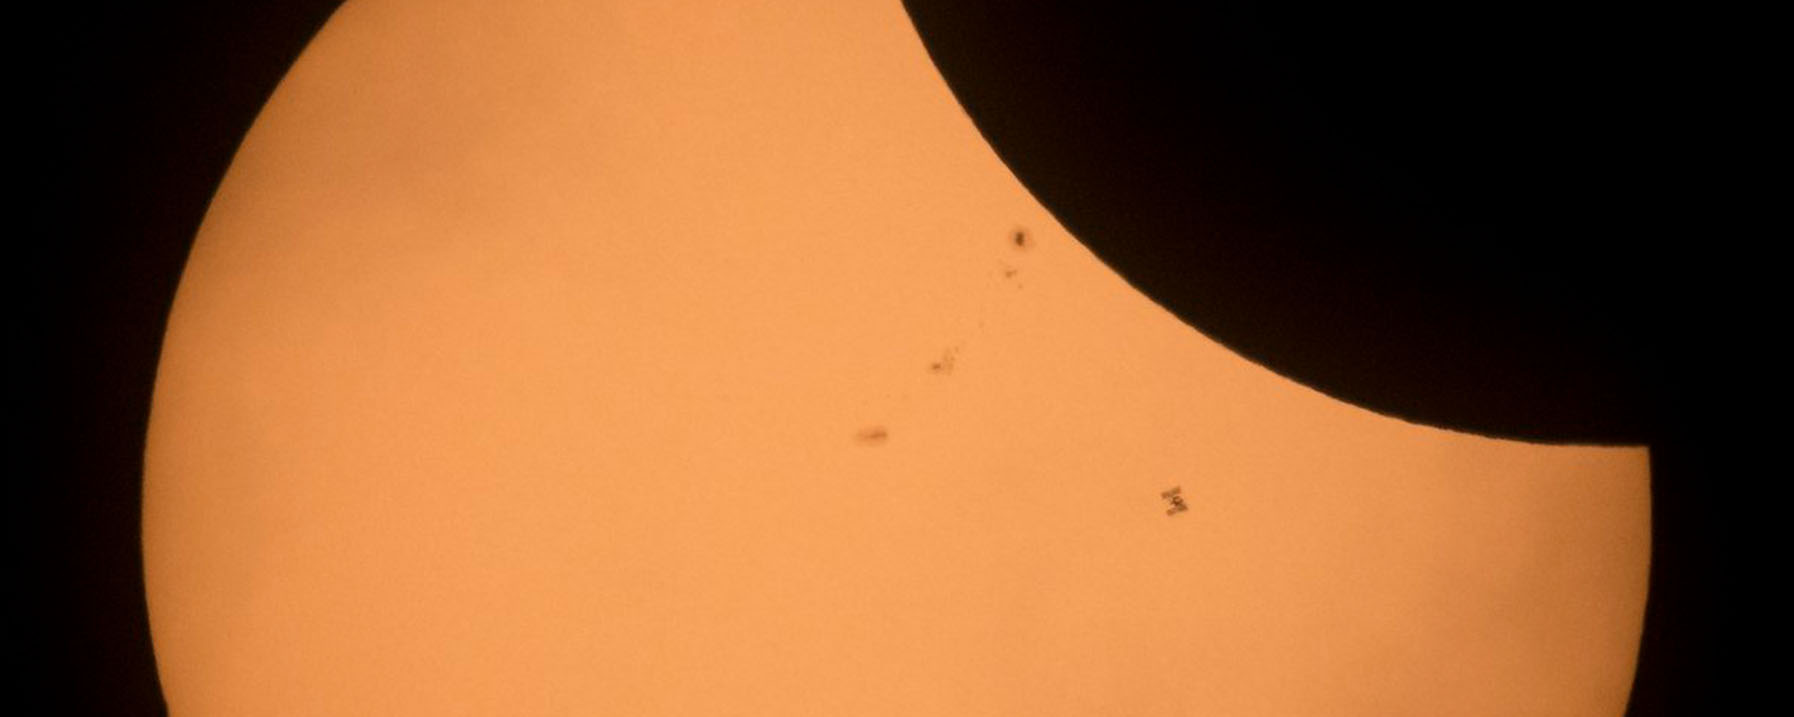 The International Space Station Transits the Sun During the 2017 Solar Eclipse